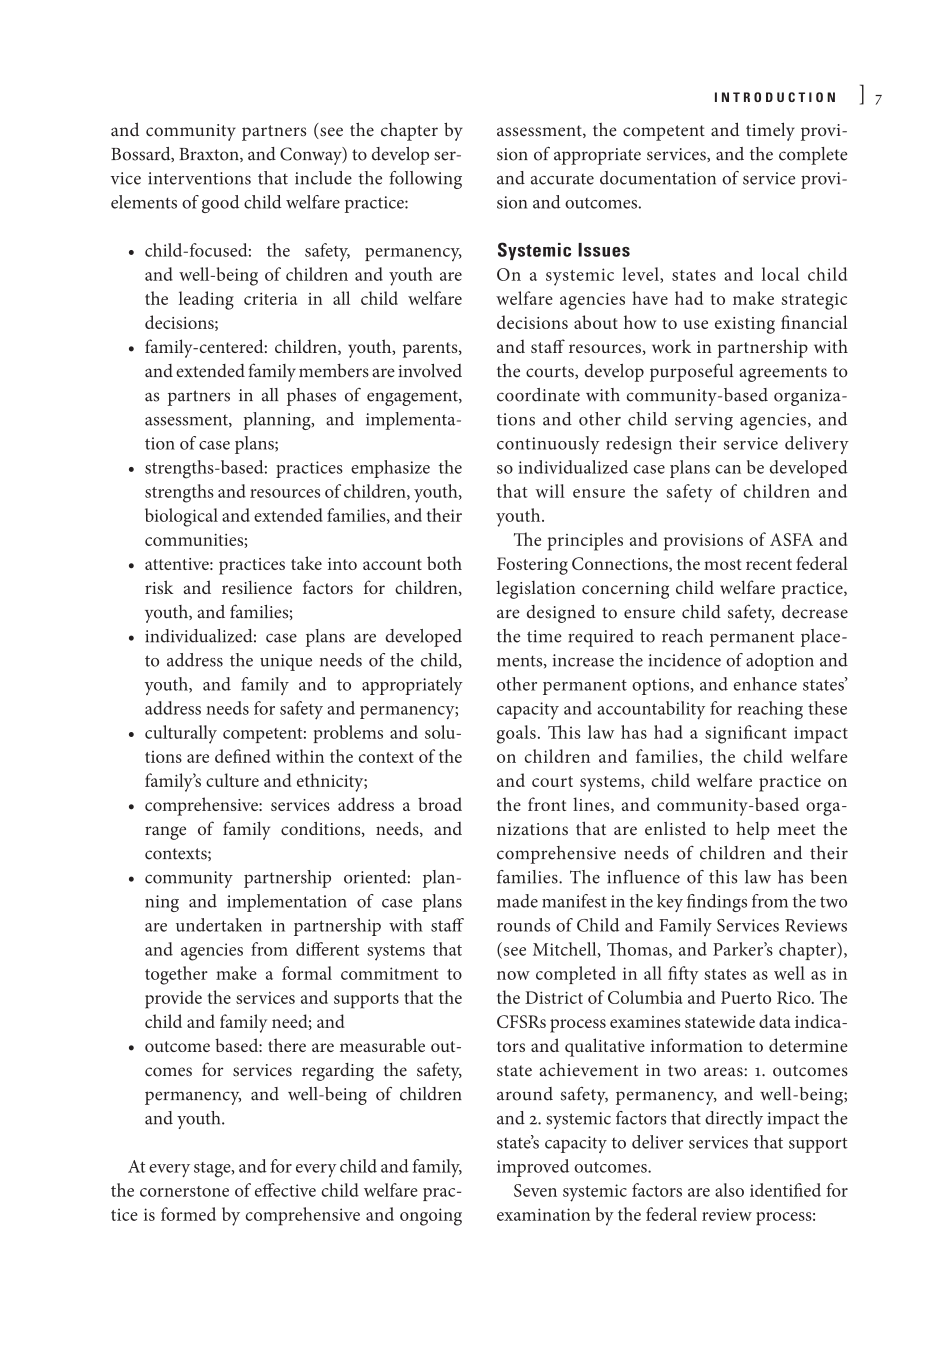 Child Welfare for the Twenty-first Century: A Handbook of Practices, Policies, and Programs, second edition page 7